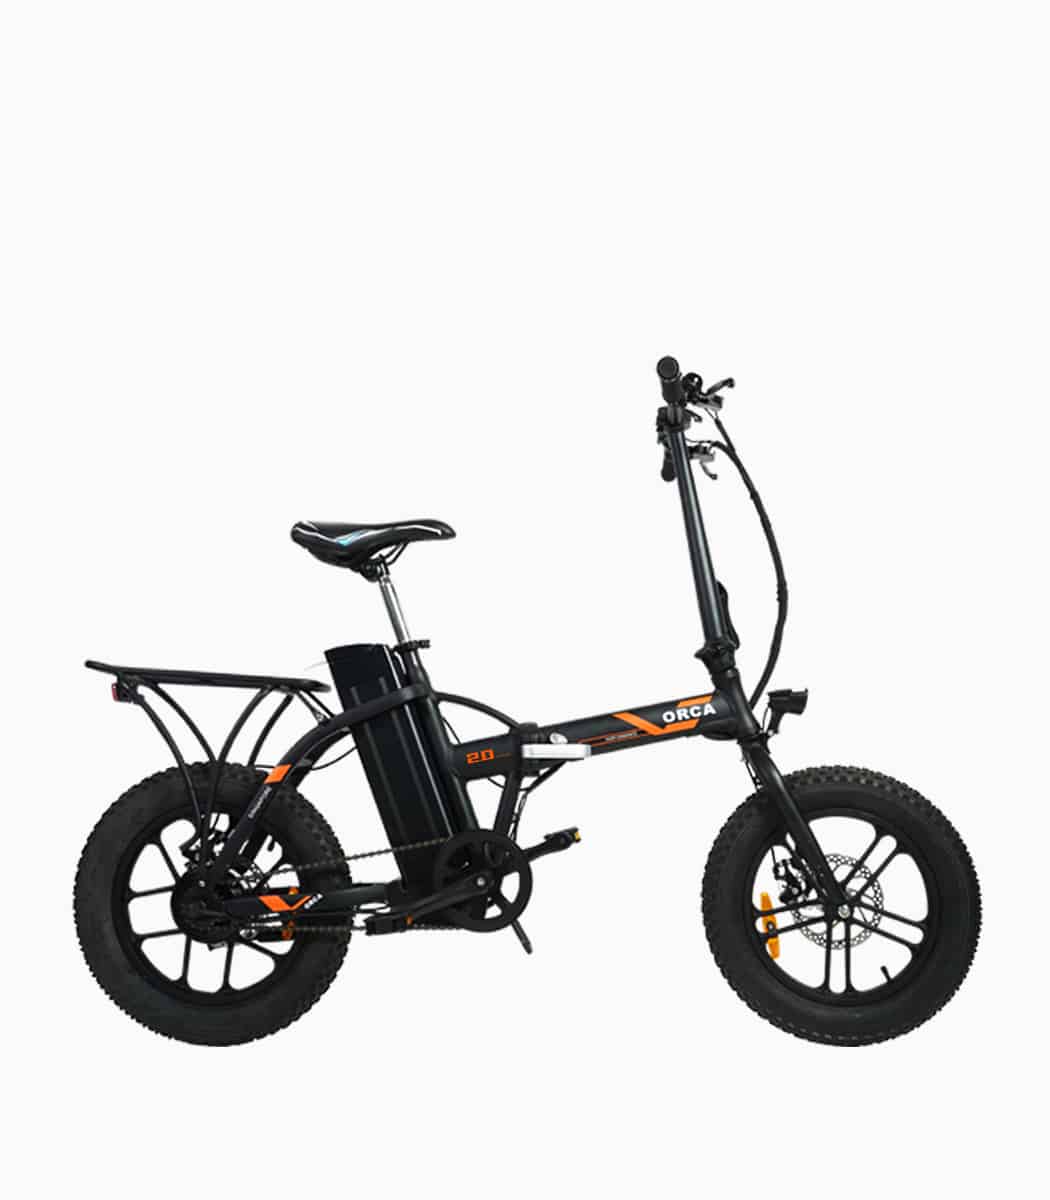 ORCA BLACK17.5AH LTA approved fat tyre electric bicycle right V2 1 - Home